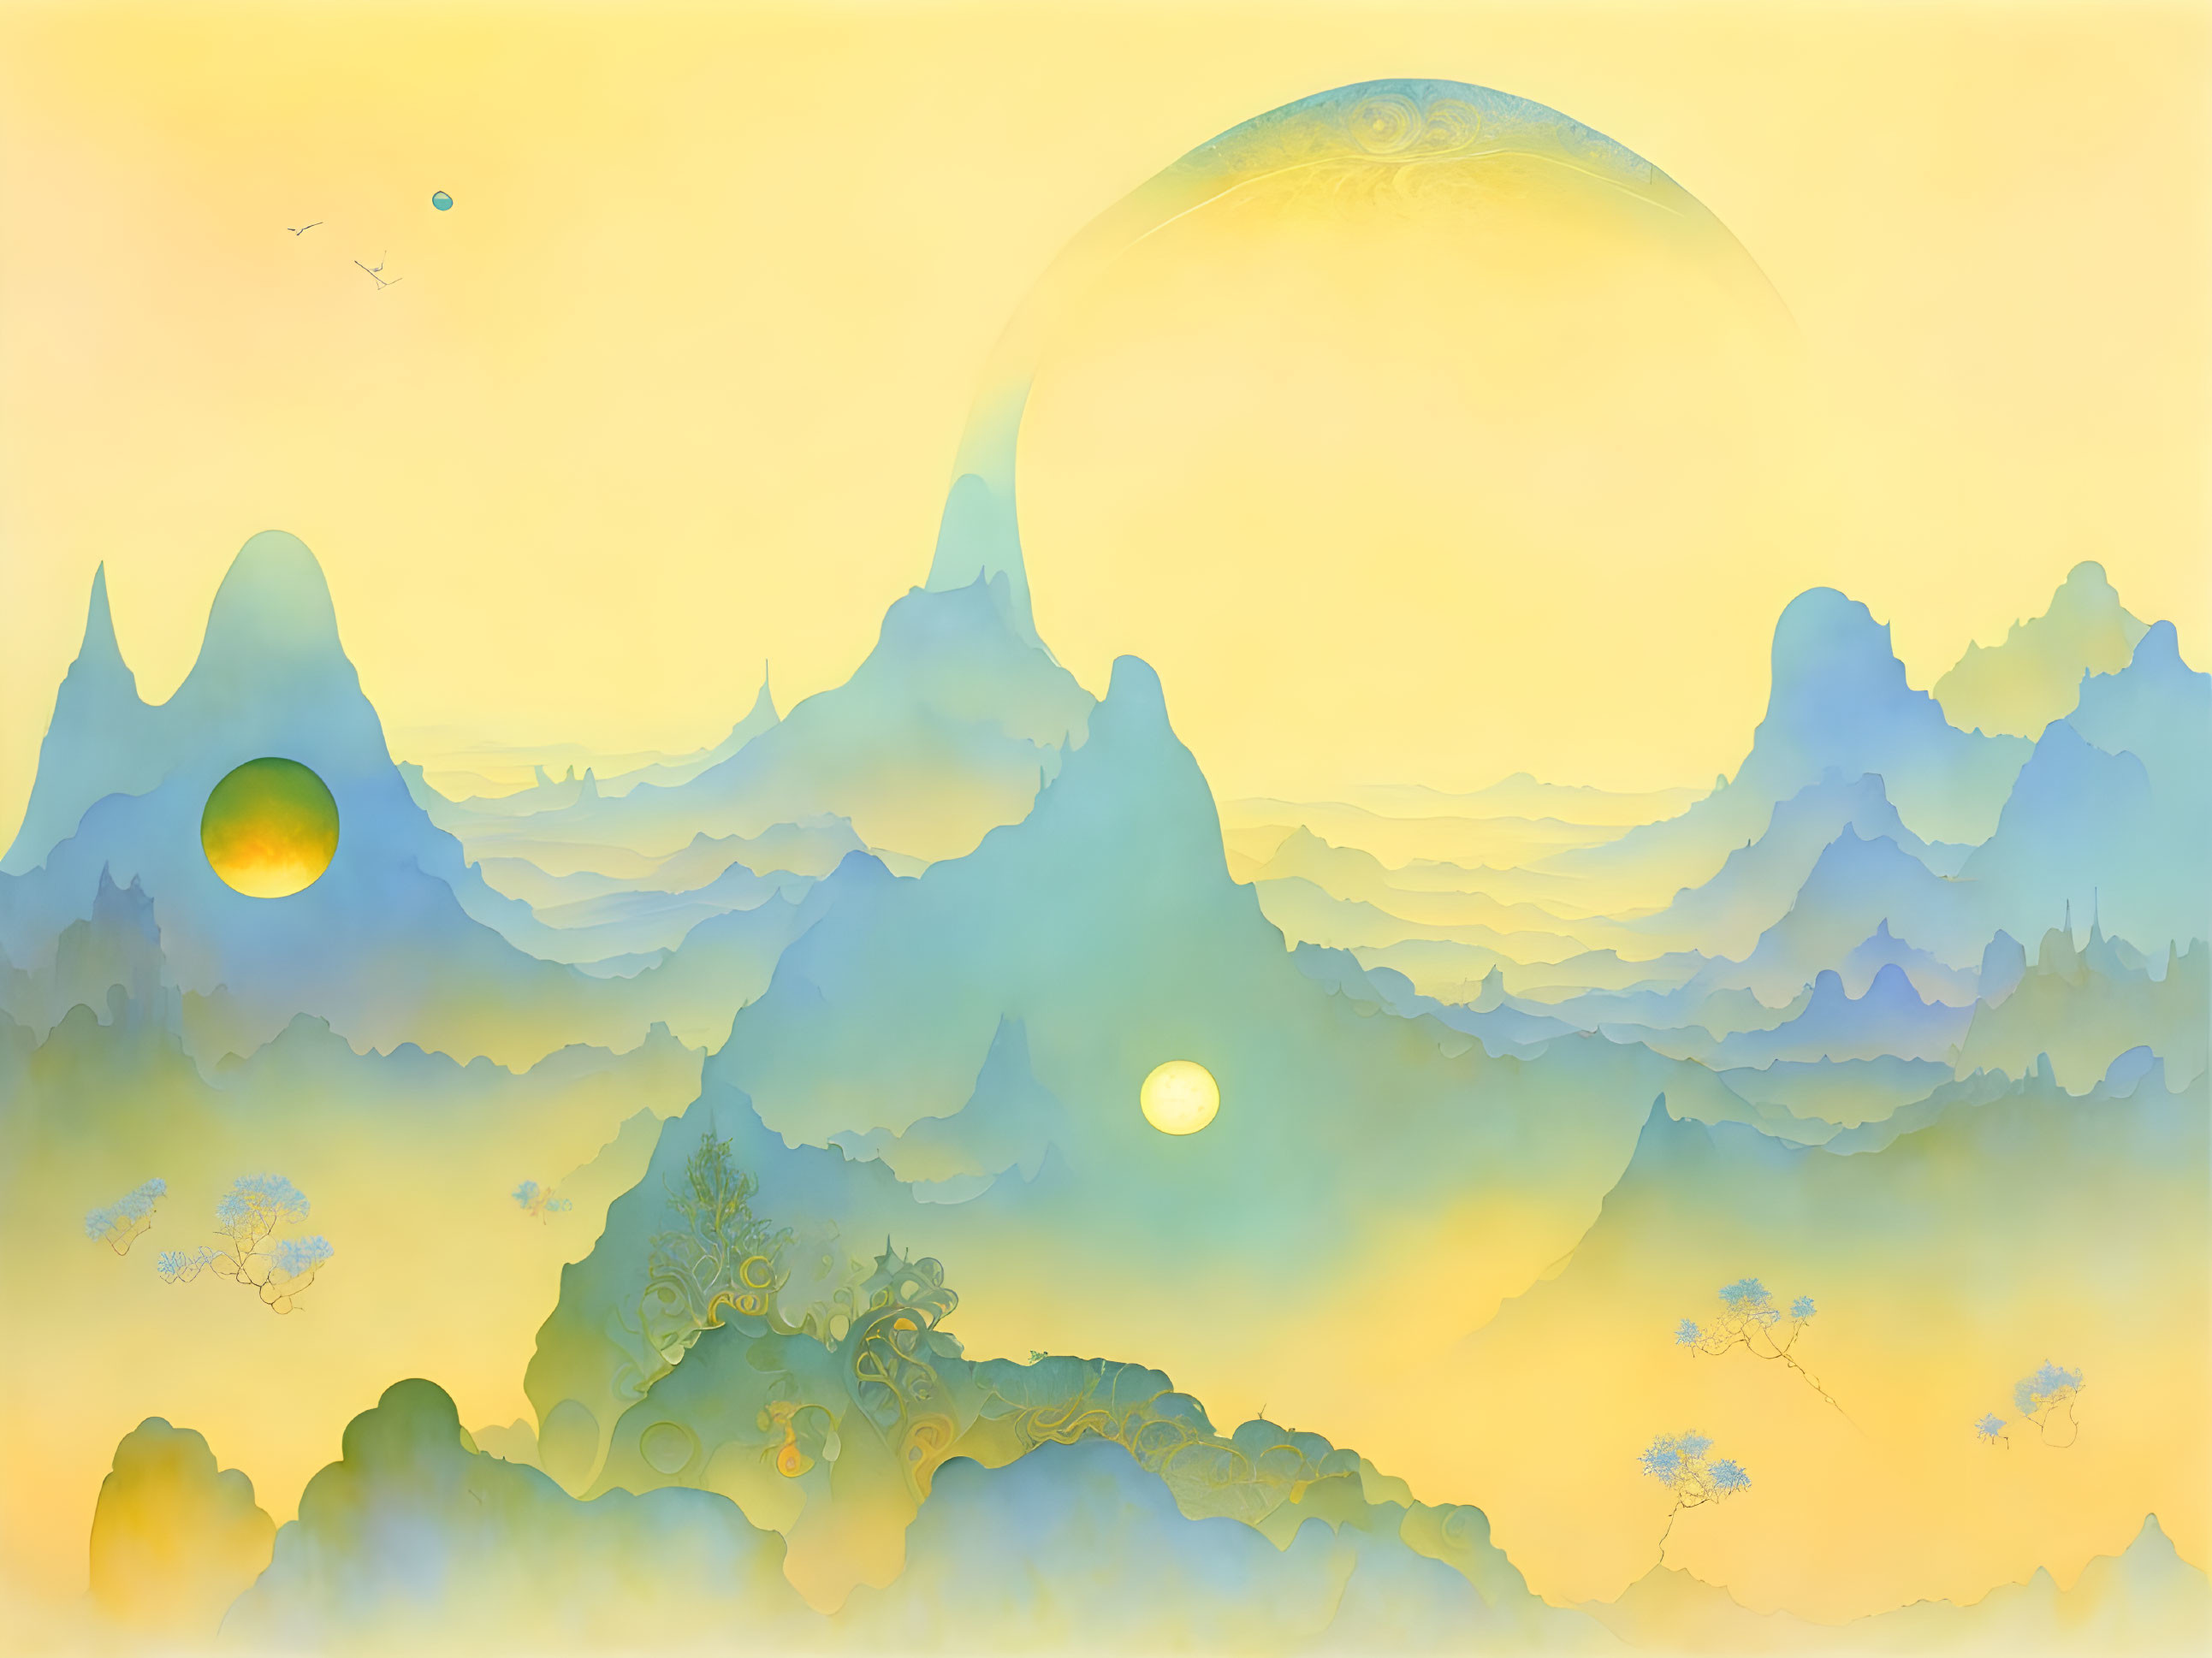 Soft-hued mountains, crescent moon, sun orbs, and bird in flight in dreamy landscape